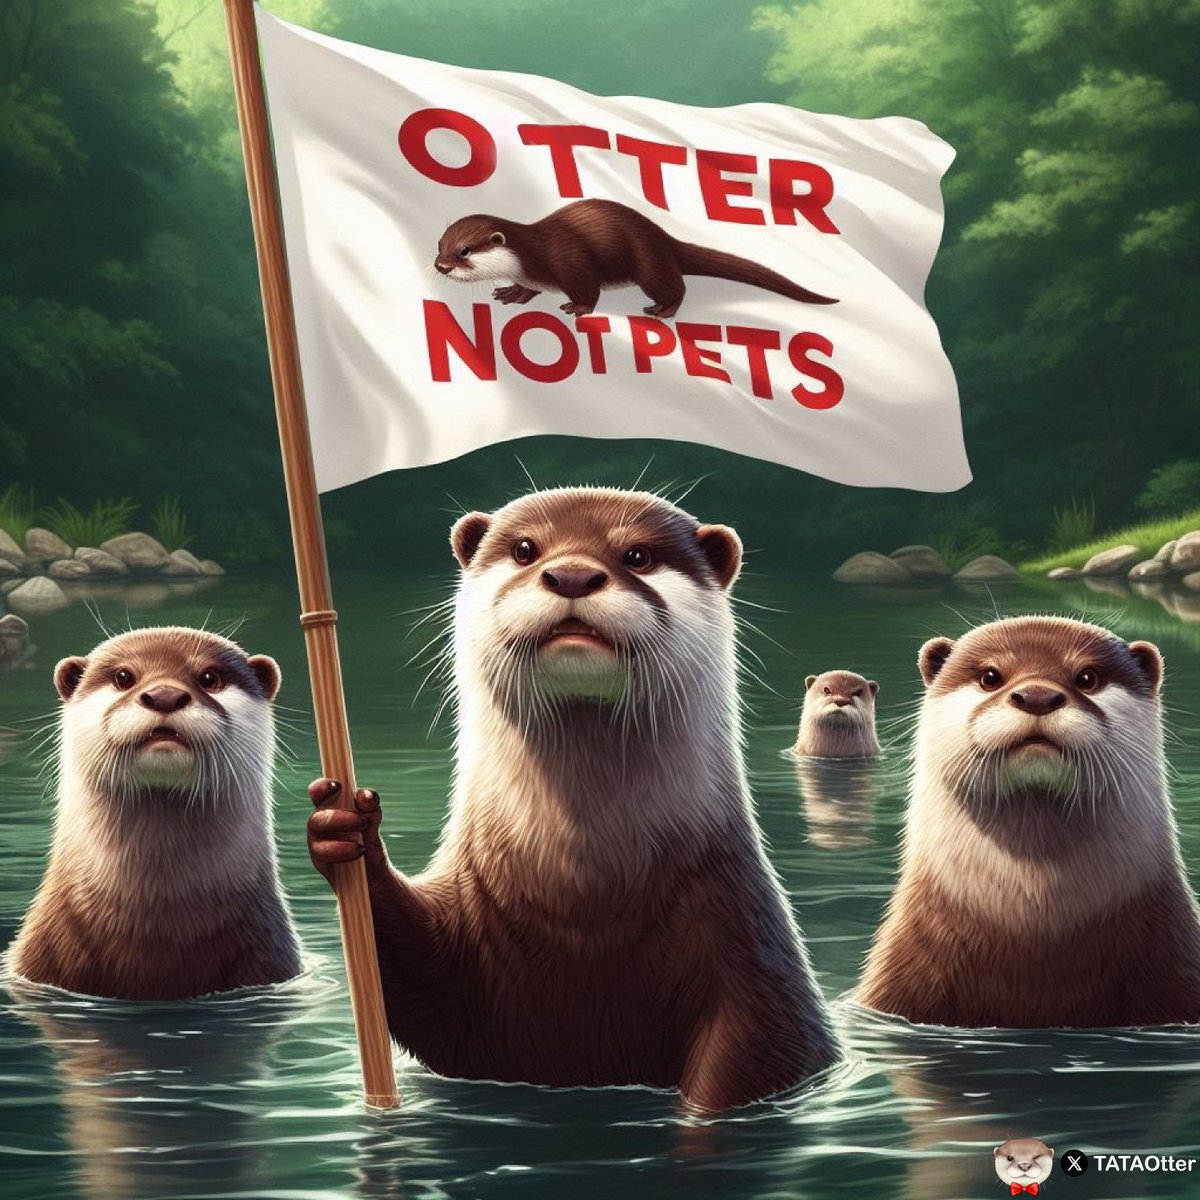 [Otter AI images]
Otters are not pets!
Baby otters(Asian small-clawed otters) smuggling still happen in recent years because of demand for pet otters.
Stop liking and sharing pet otter pics and videos!
Do not support illegal otter trade!

#otter #AIgeneratedimage #AI
#カワウソ